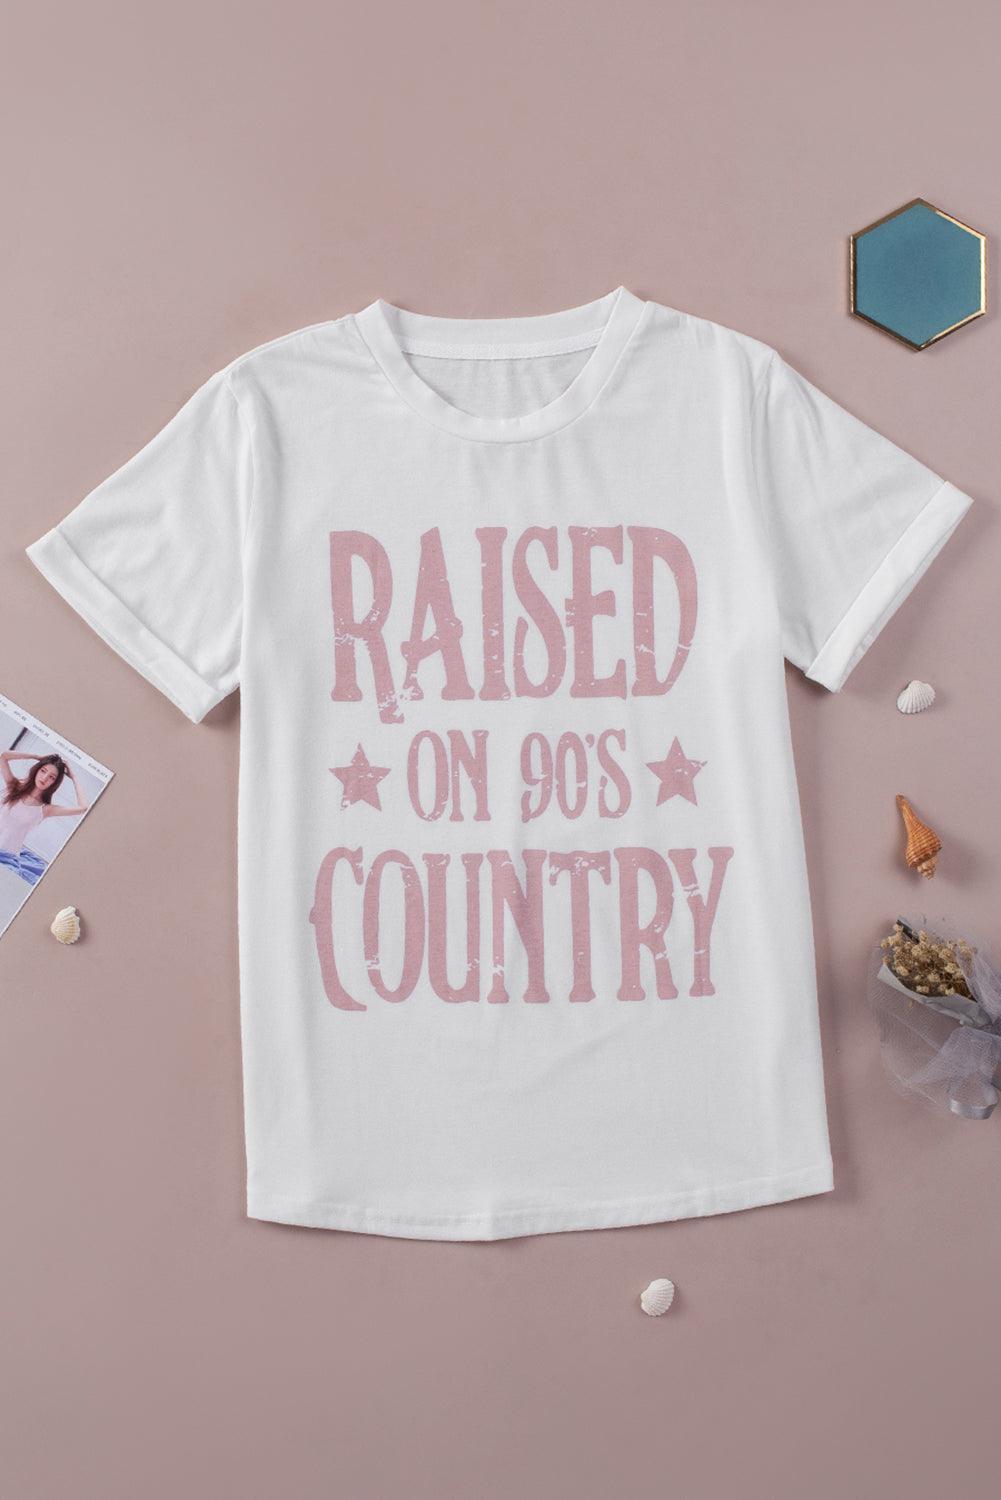 RAISED ON 90'S COUNTRY Graphic Tee - Olive Ave